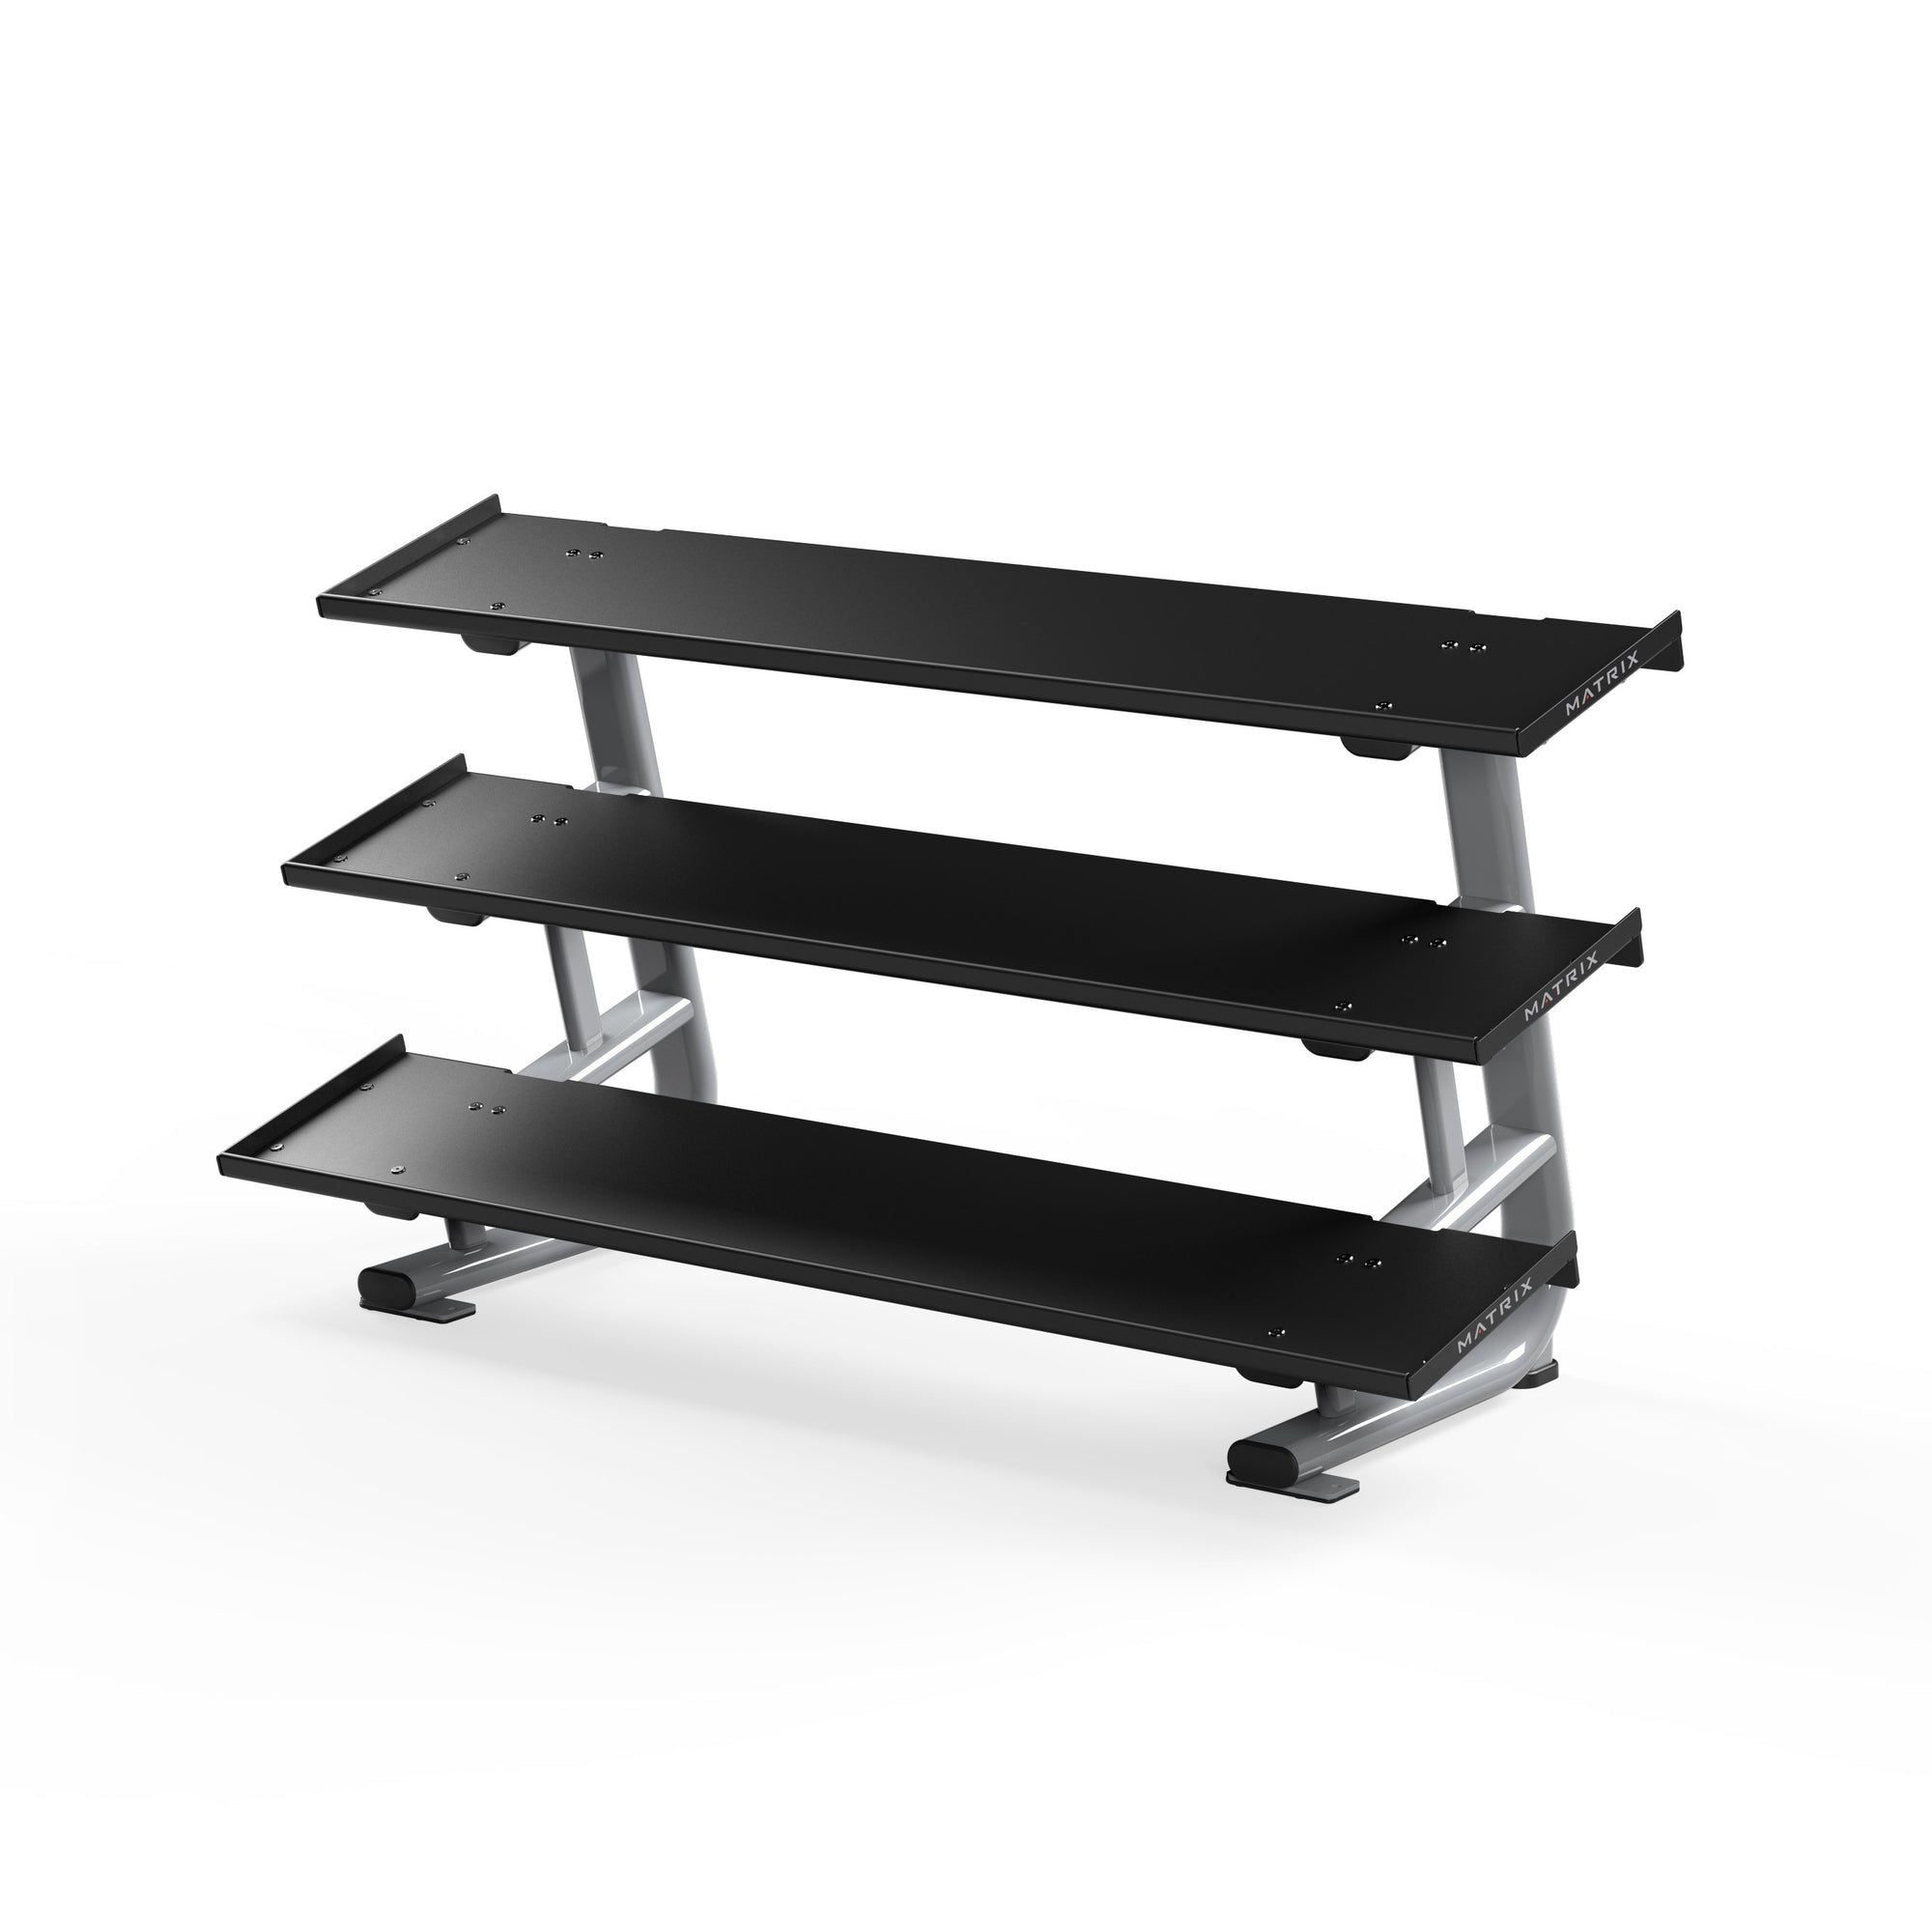 Matrix Fitness Magnum 3-Tier Flat-Tray Dumbbell Rack Short full view | Fitness Experience